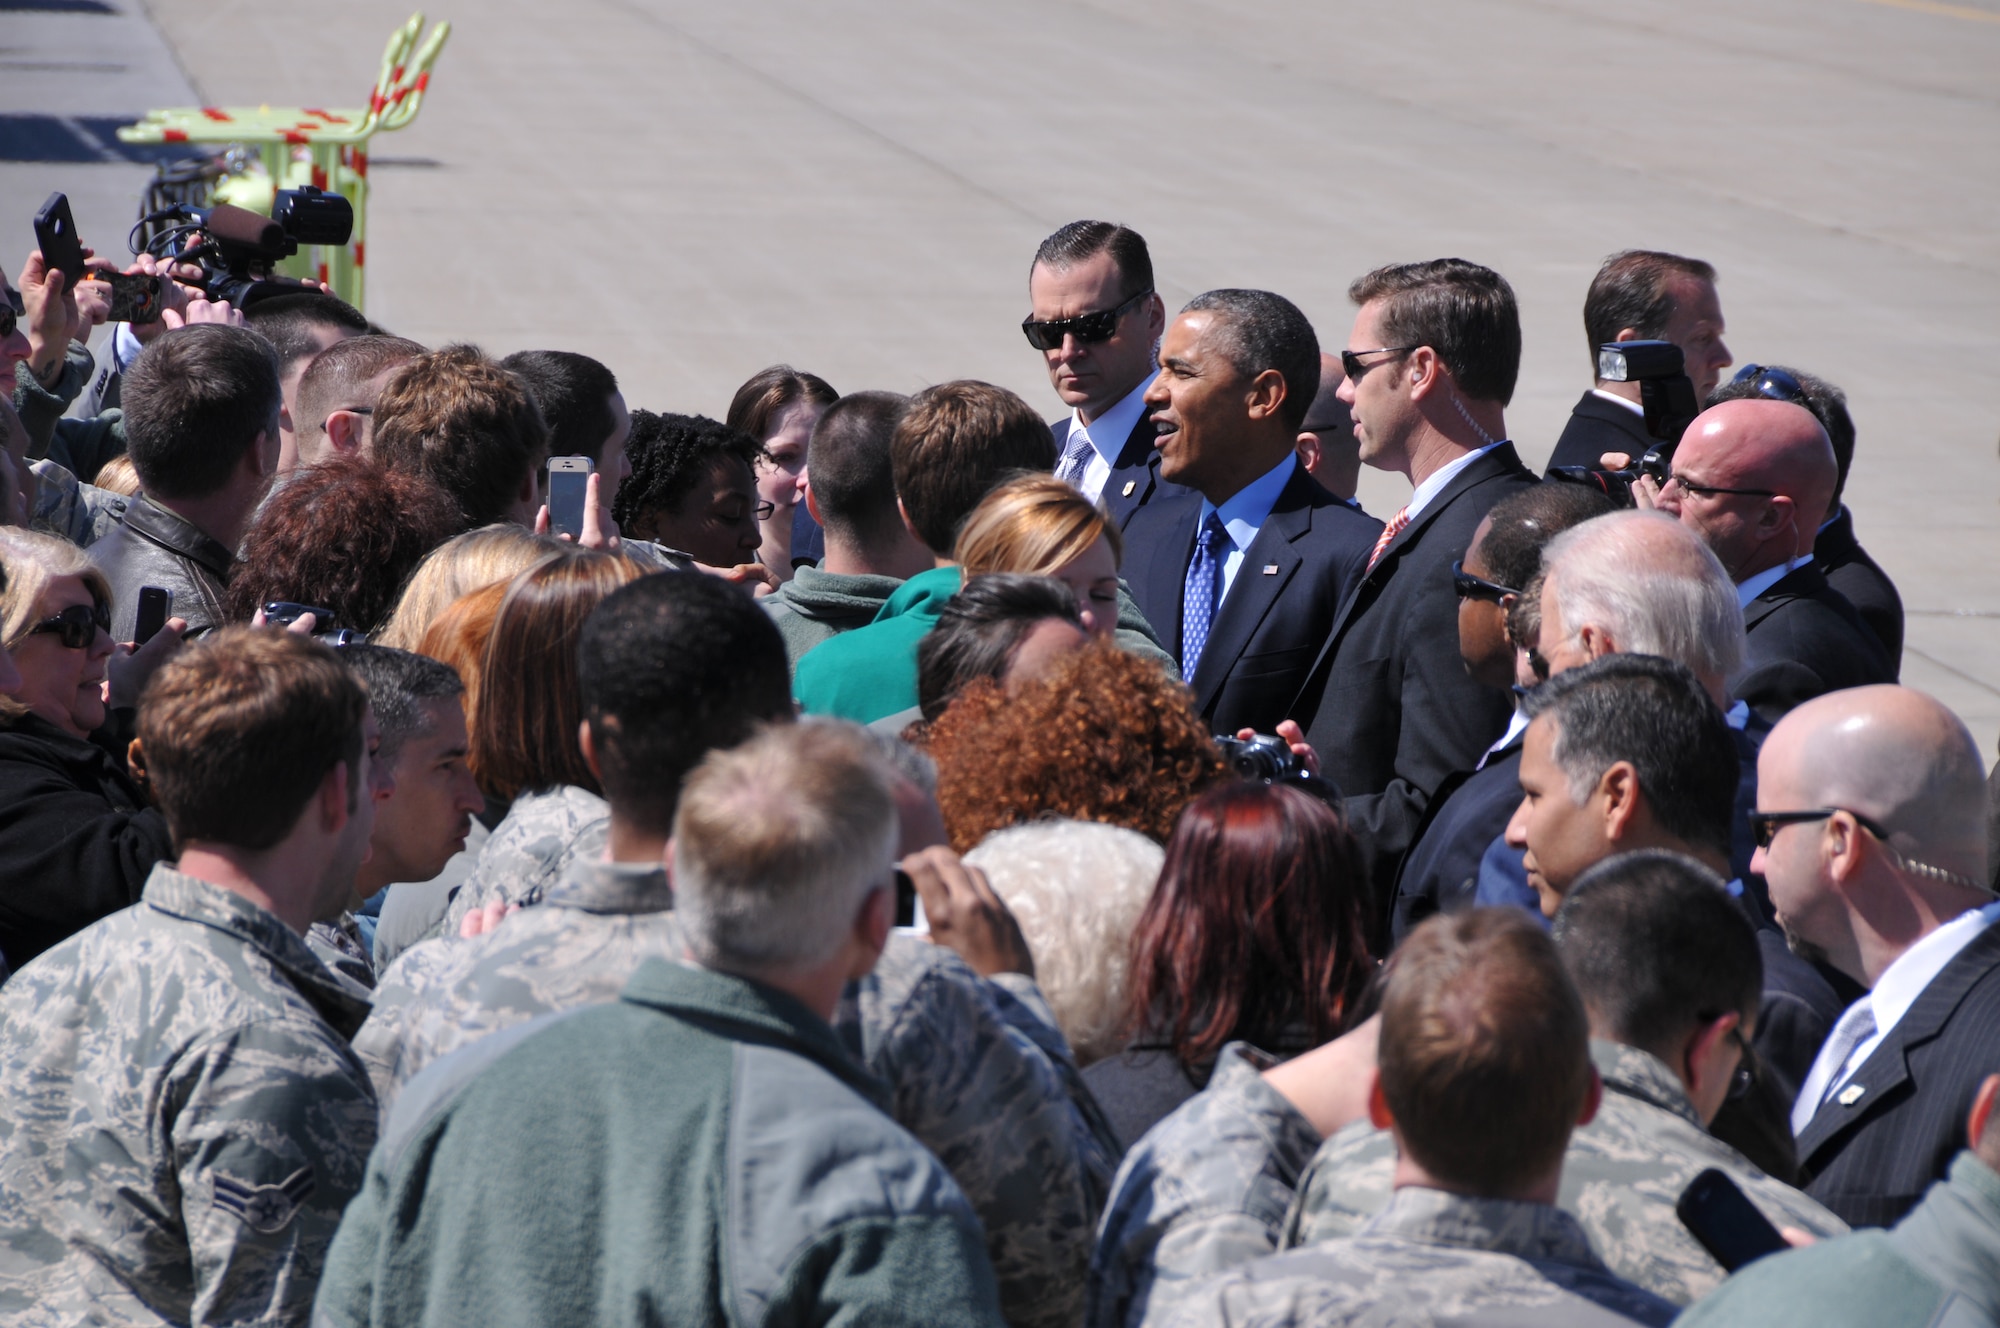 President Obama and Vice President Biden land at the Pennsylvania Air National Guard 171st Air Refueling Wing near Pittsburgh Pennsylvania, April 16, 2014. Before their tour of the Community College of Allegheny County West Hills Center to speak on the importance of jobs-driven skills training, Obama and Biden took time to shake hands with members of the 171st Air Refueling Wing. (U.S. Air National Guard Photo by Major Karen Bogdan/Released)